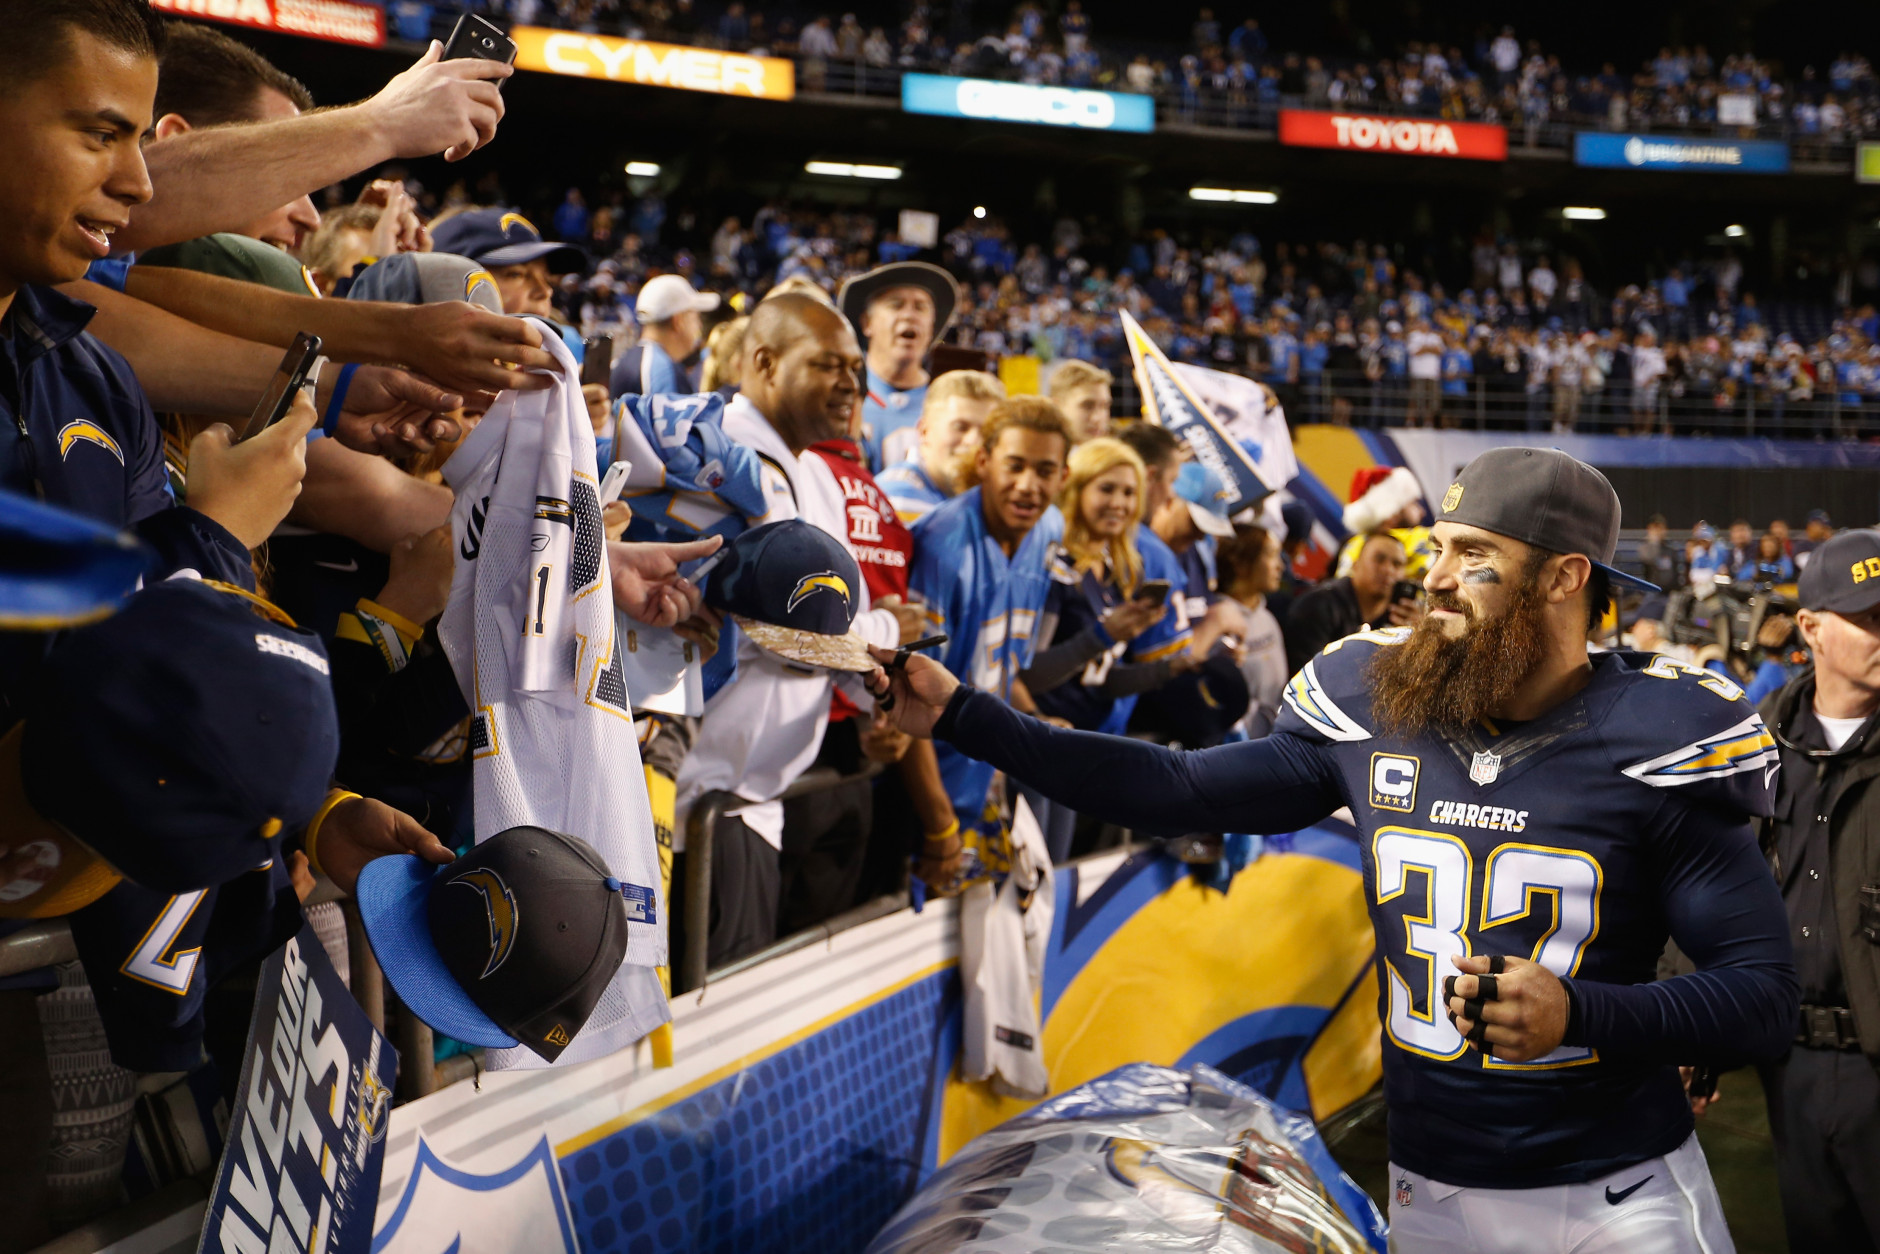 SAN DIEGO, CA - DECEMBER 20:   Eric Weddle #32 of the San Diego Chargers greets fans after the San Diego Chargers defeated the Miami Dolphins 30-14 at Qualcomm Stadium on December 20, 2015 in San Diego, California.  (Photo by Sean M. Haffey/Getty Images)